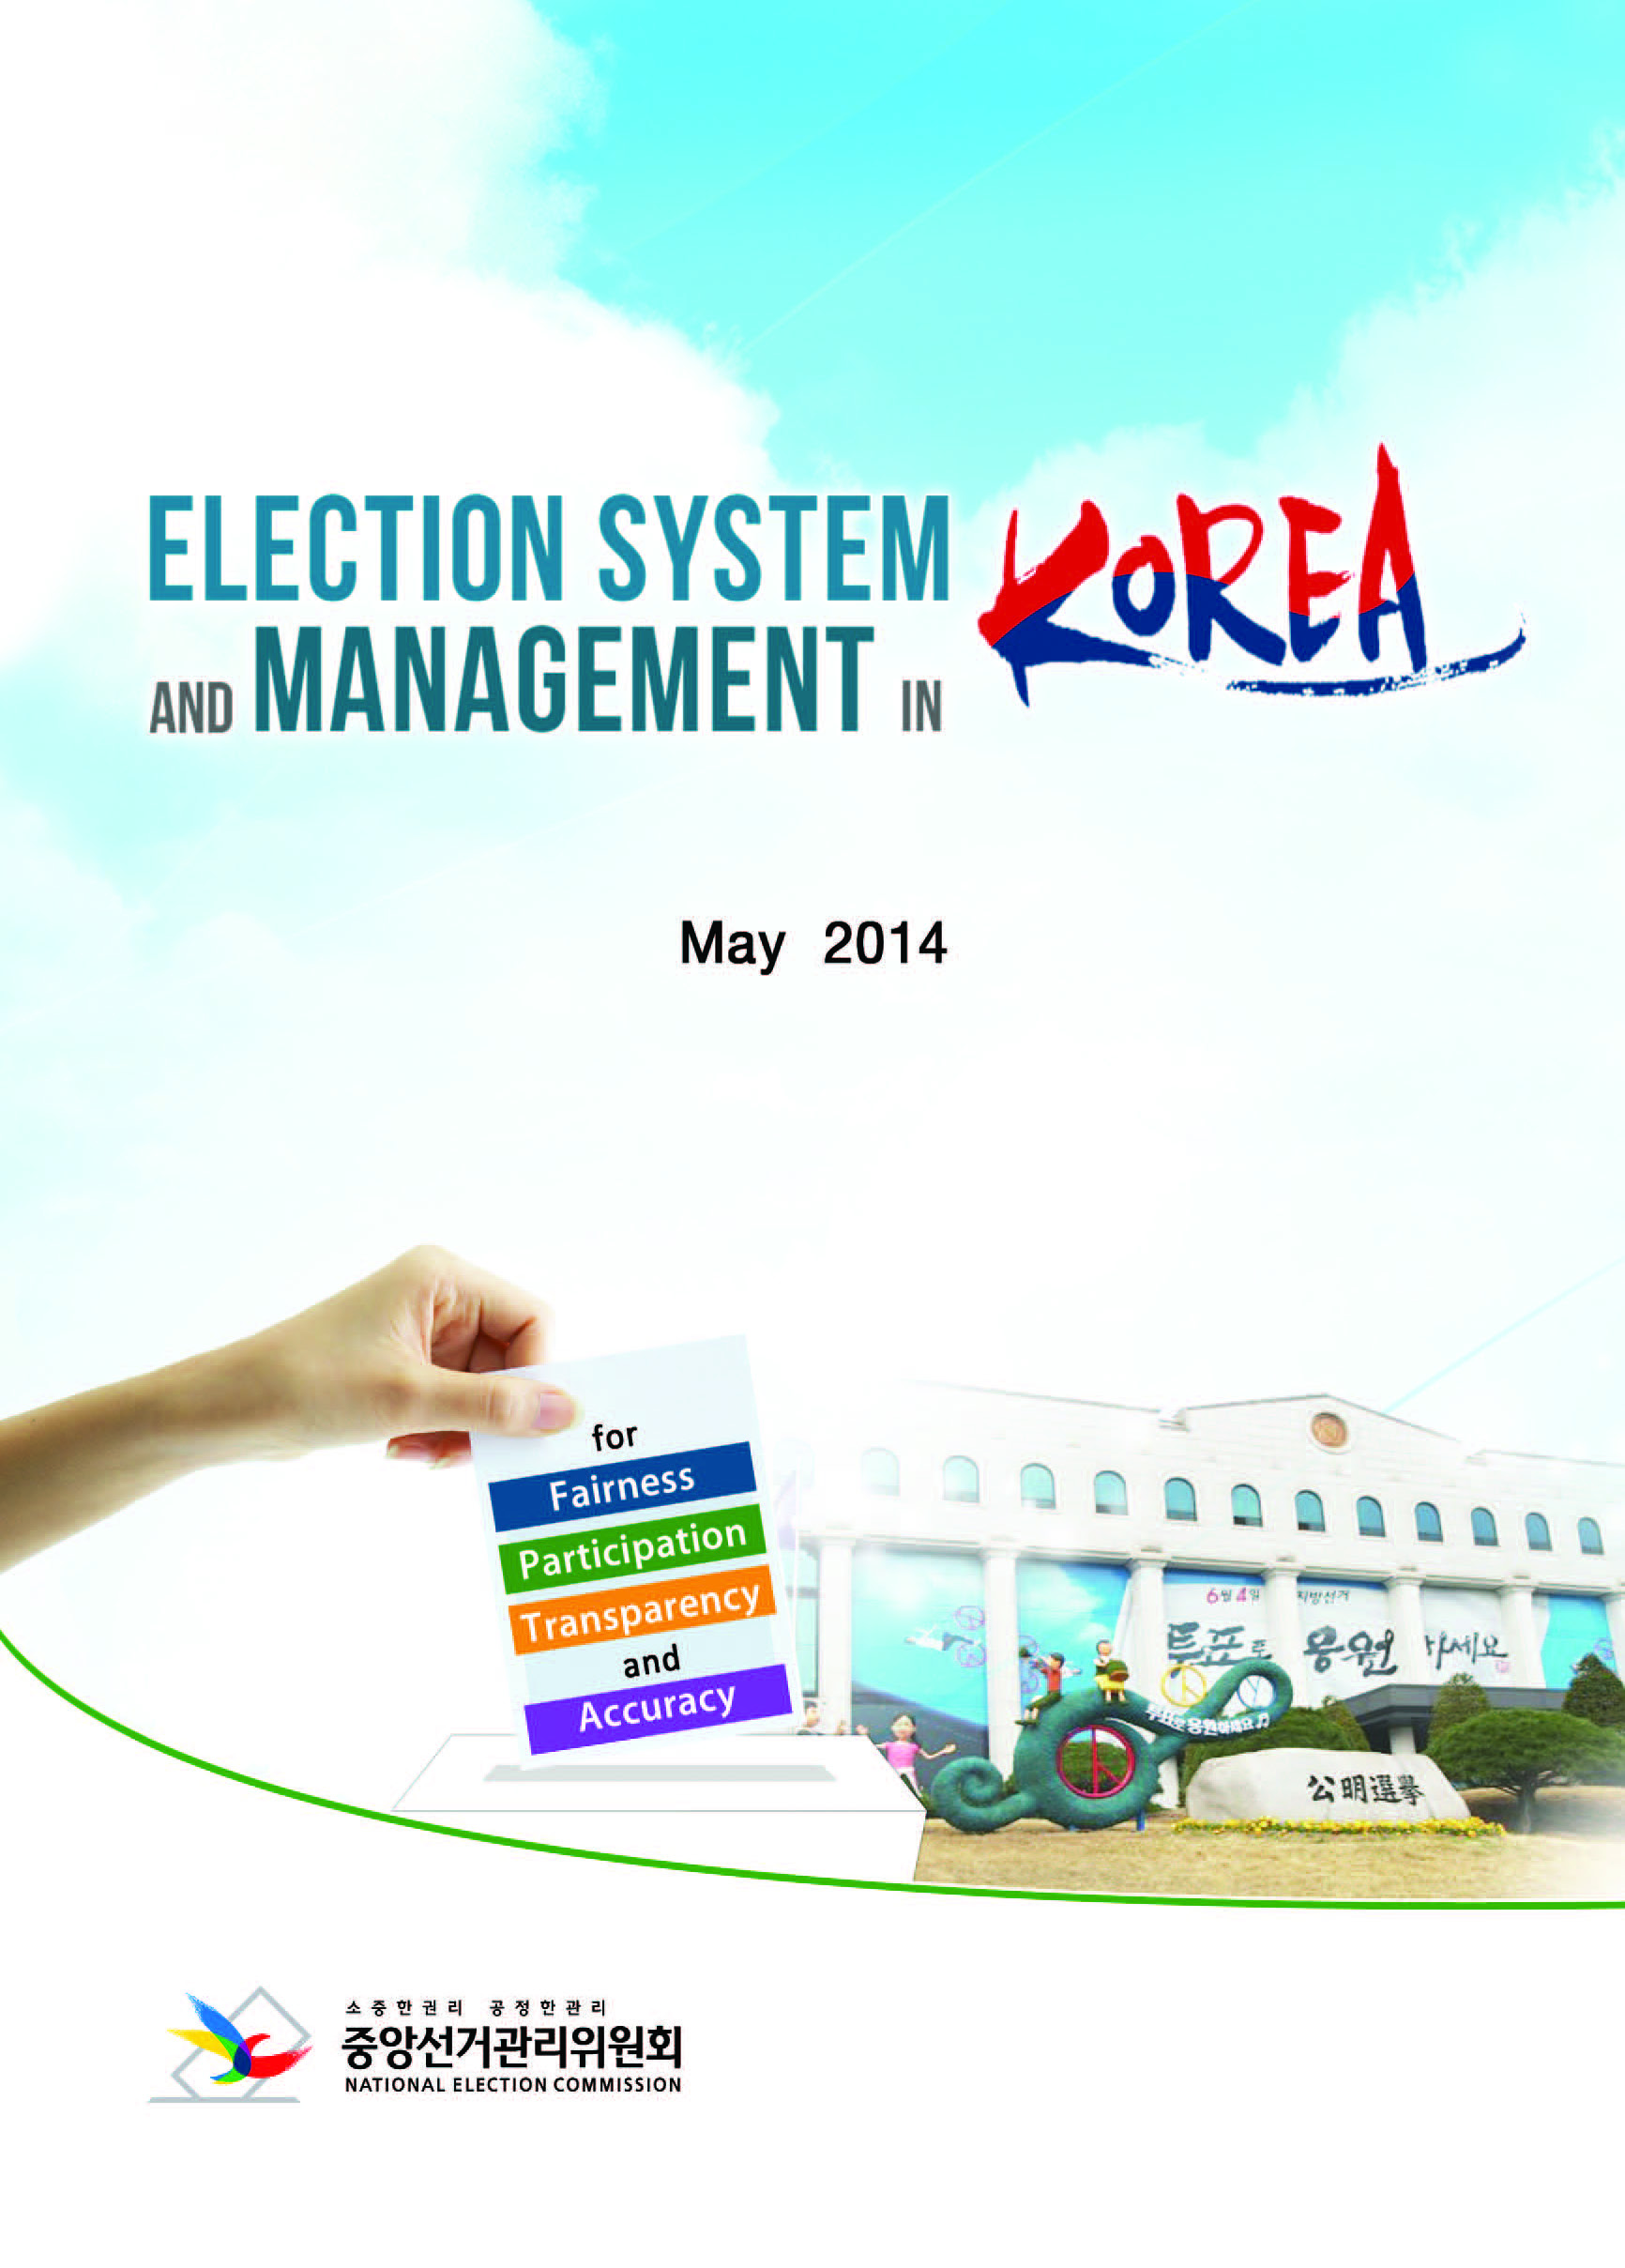 Election System and Management in Korea(Booklet)_페이지_01.jpg